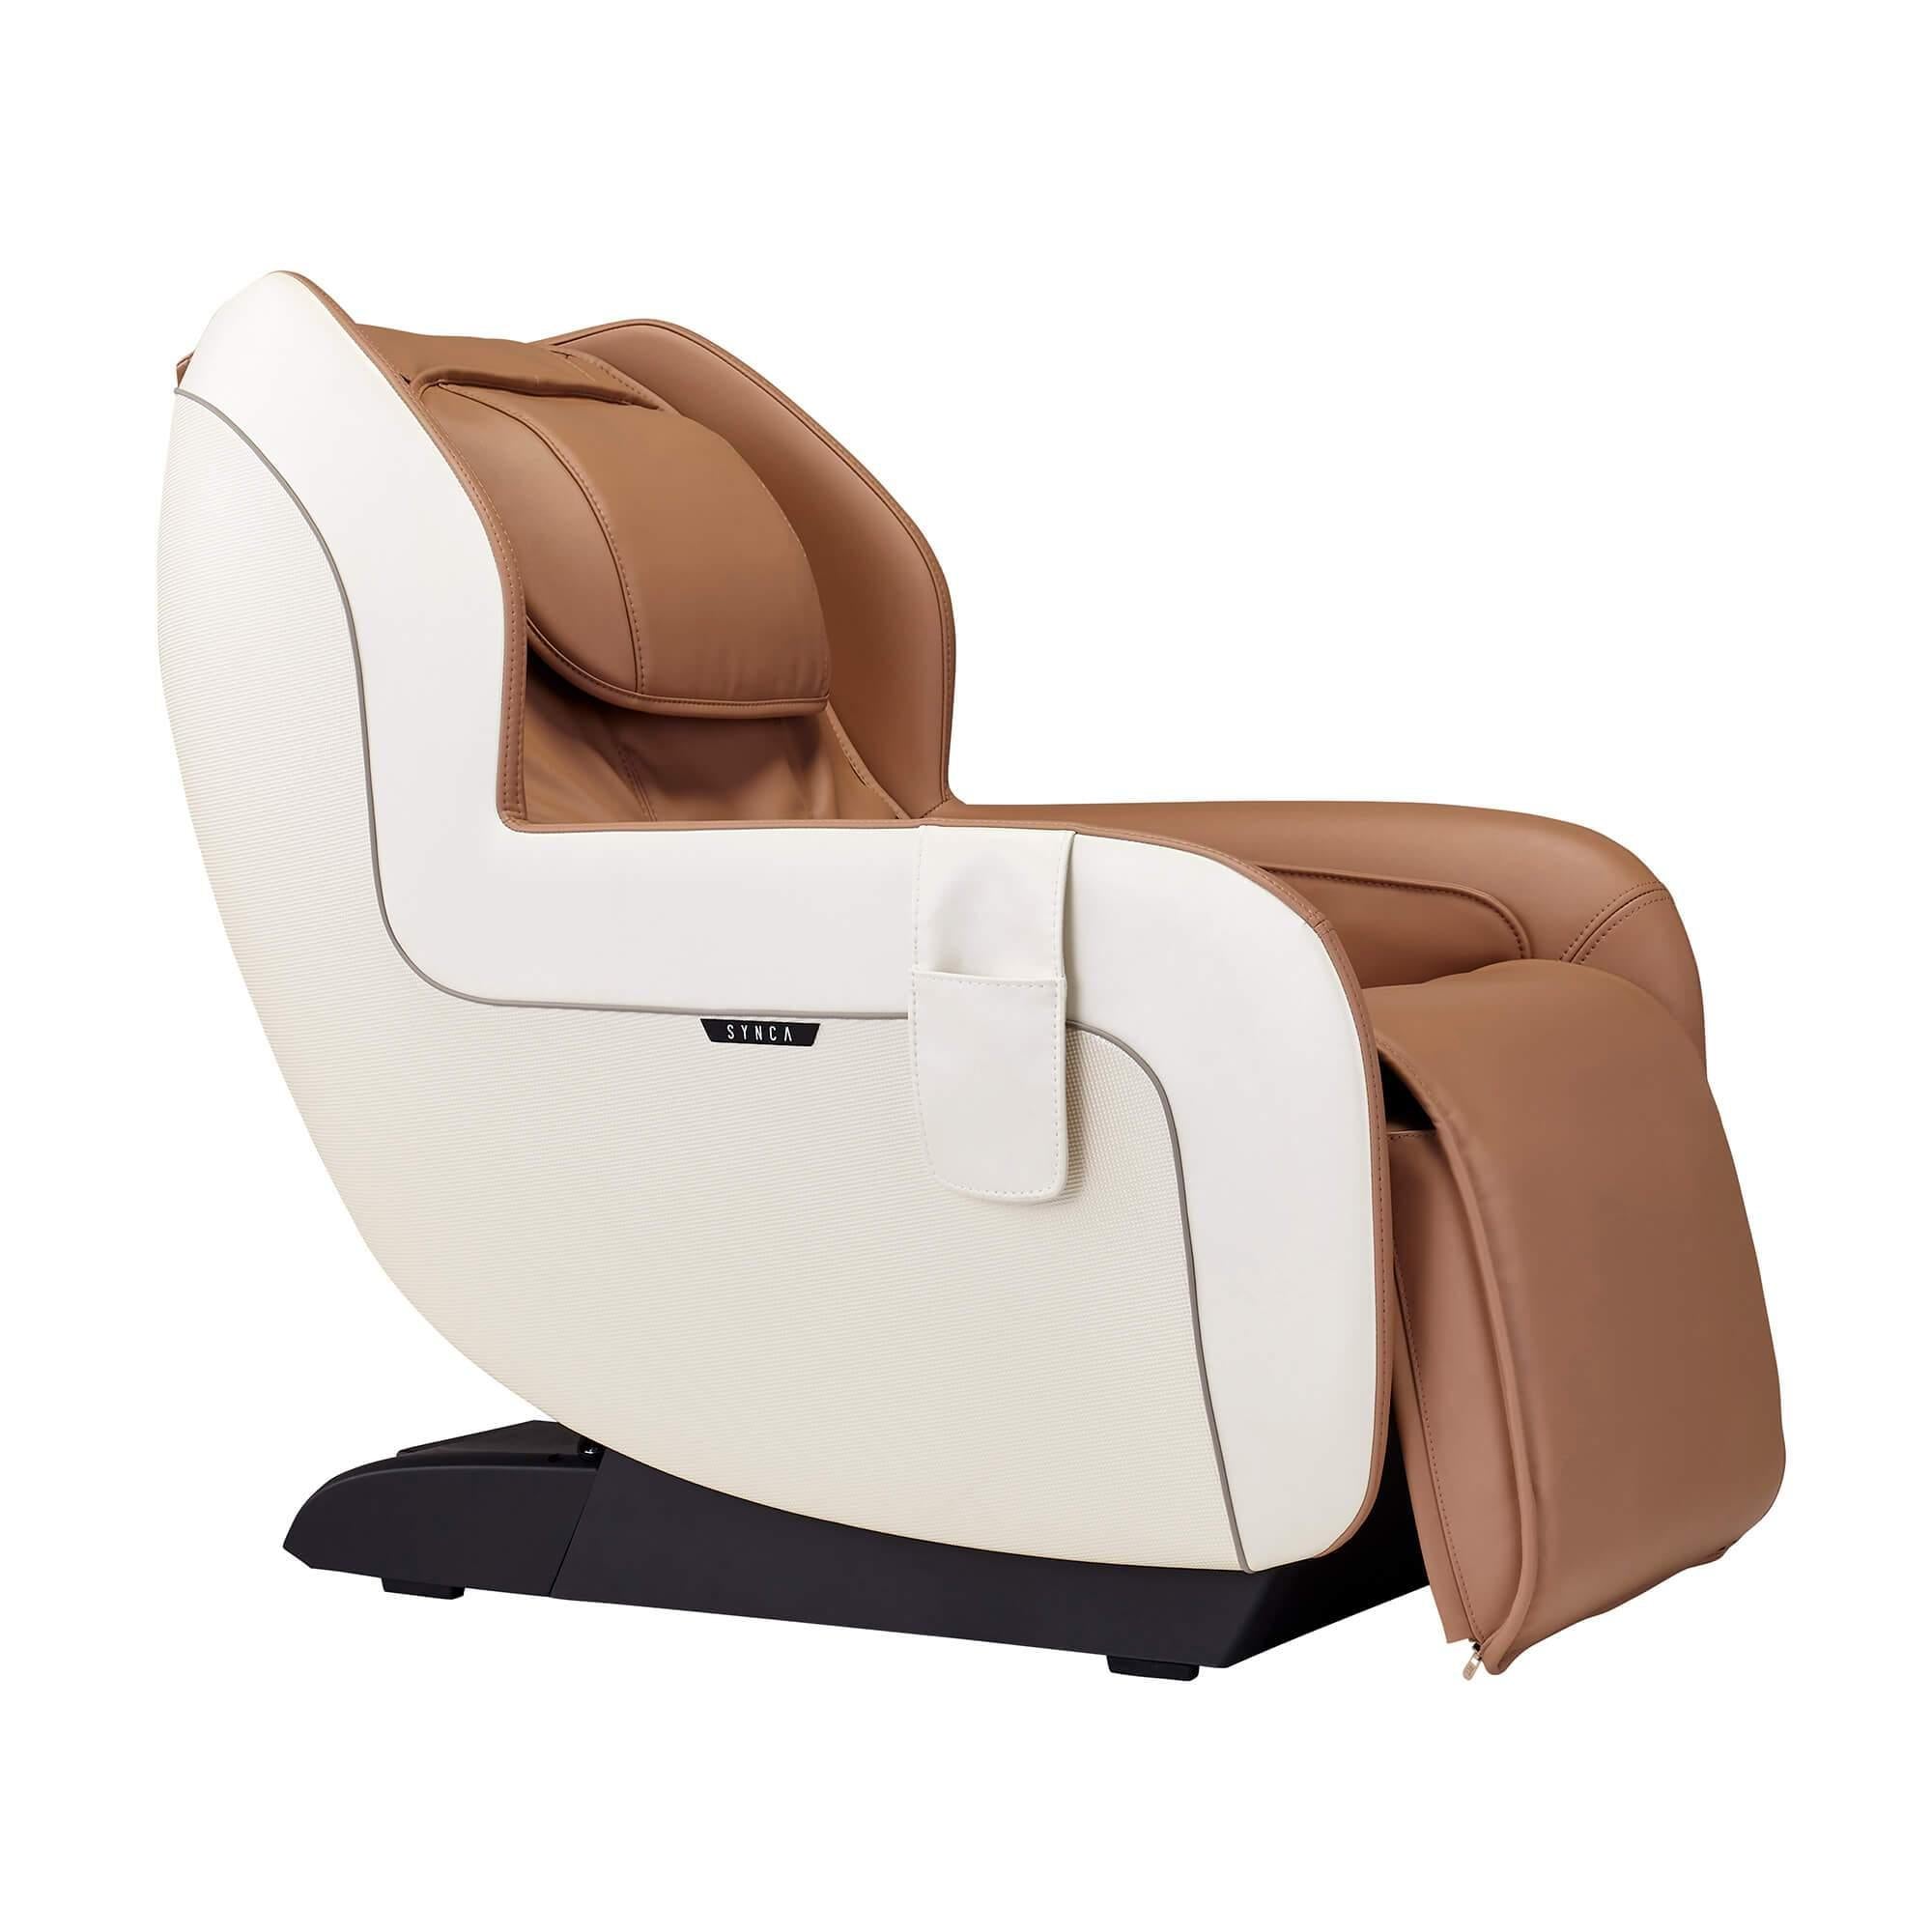 Unmatched MASSAGE Chair and Comfort CirC ZEBRA Plus - CHAIRS Massage – Style Synca